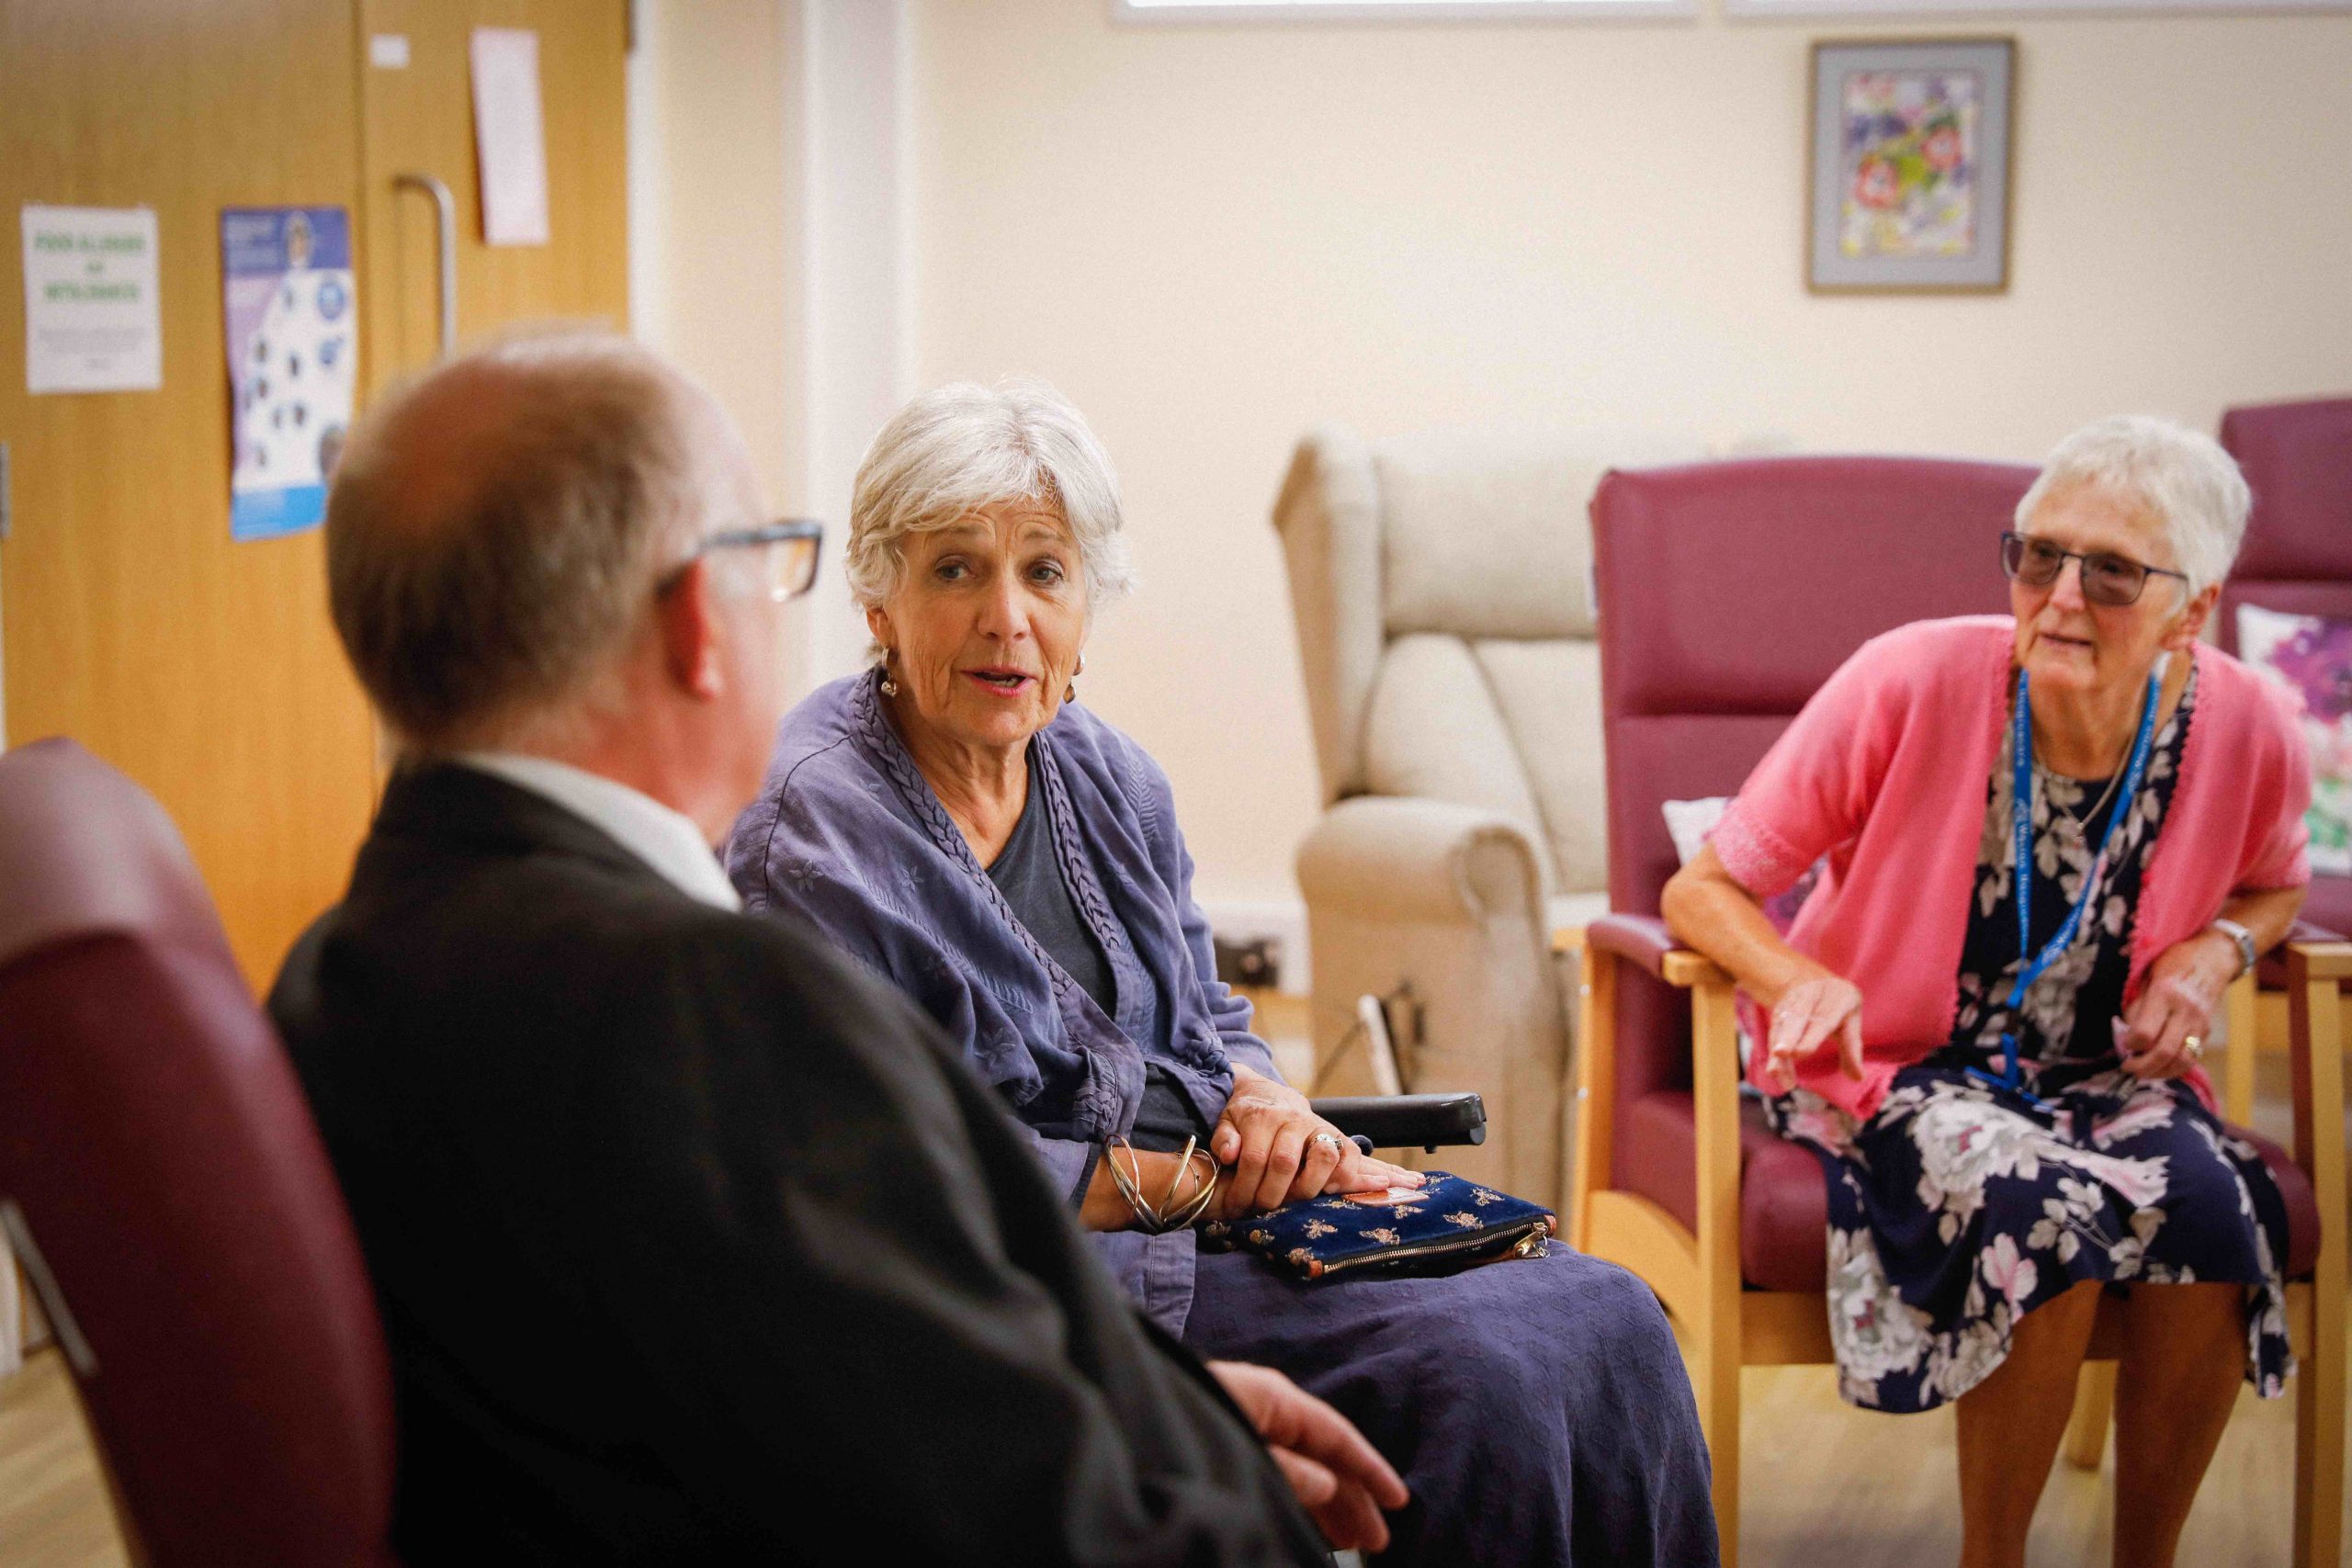 Mrs Maw, Lord-Lieutenant of Somerset, visiting Weston Hospicecare. Speaking to the charity's Director of Fundraising and Communications.